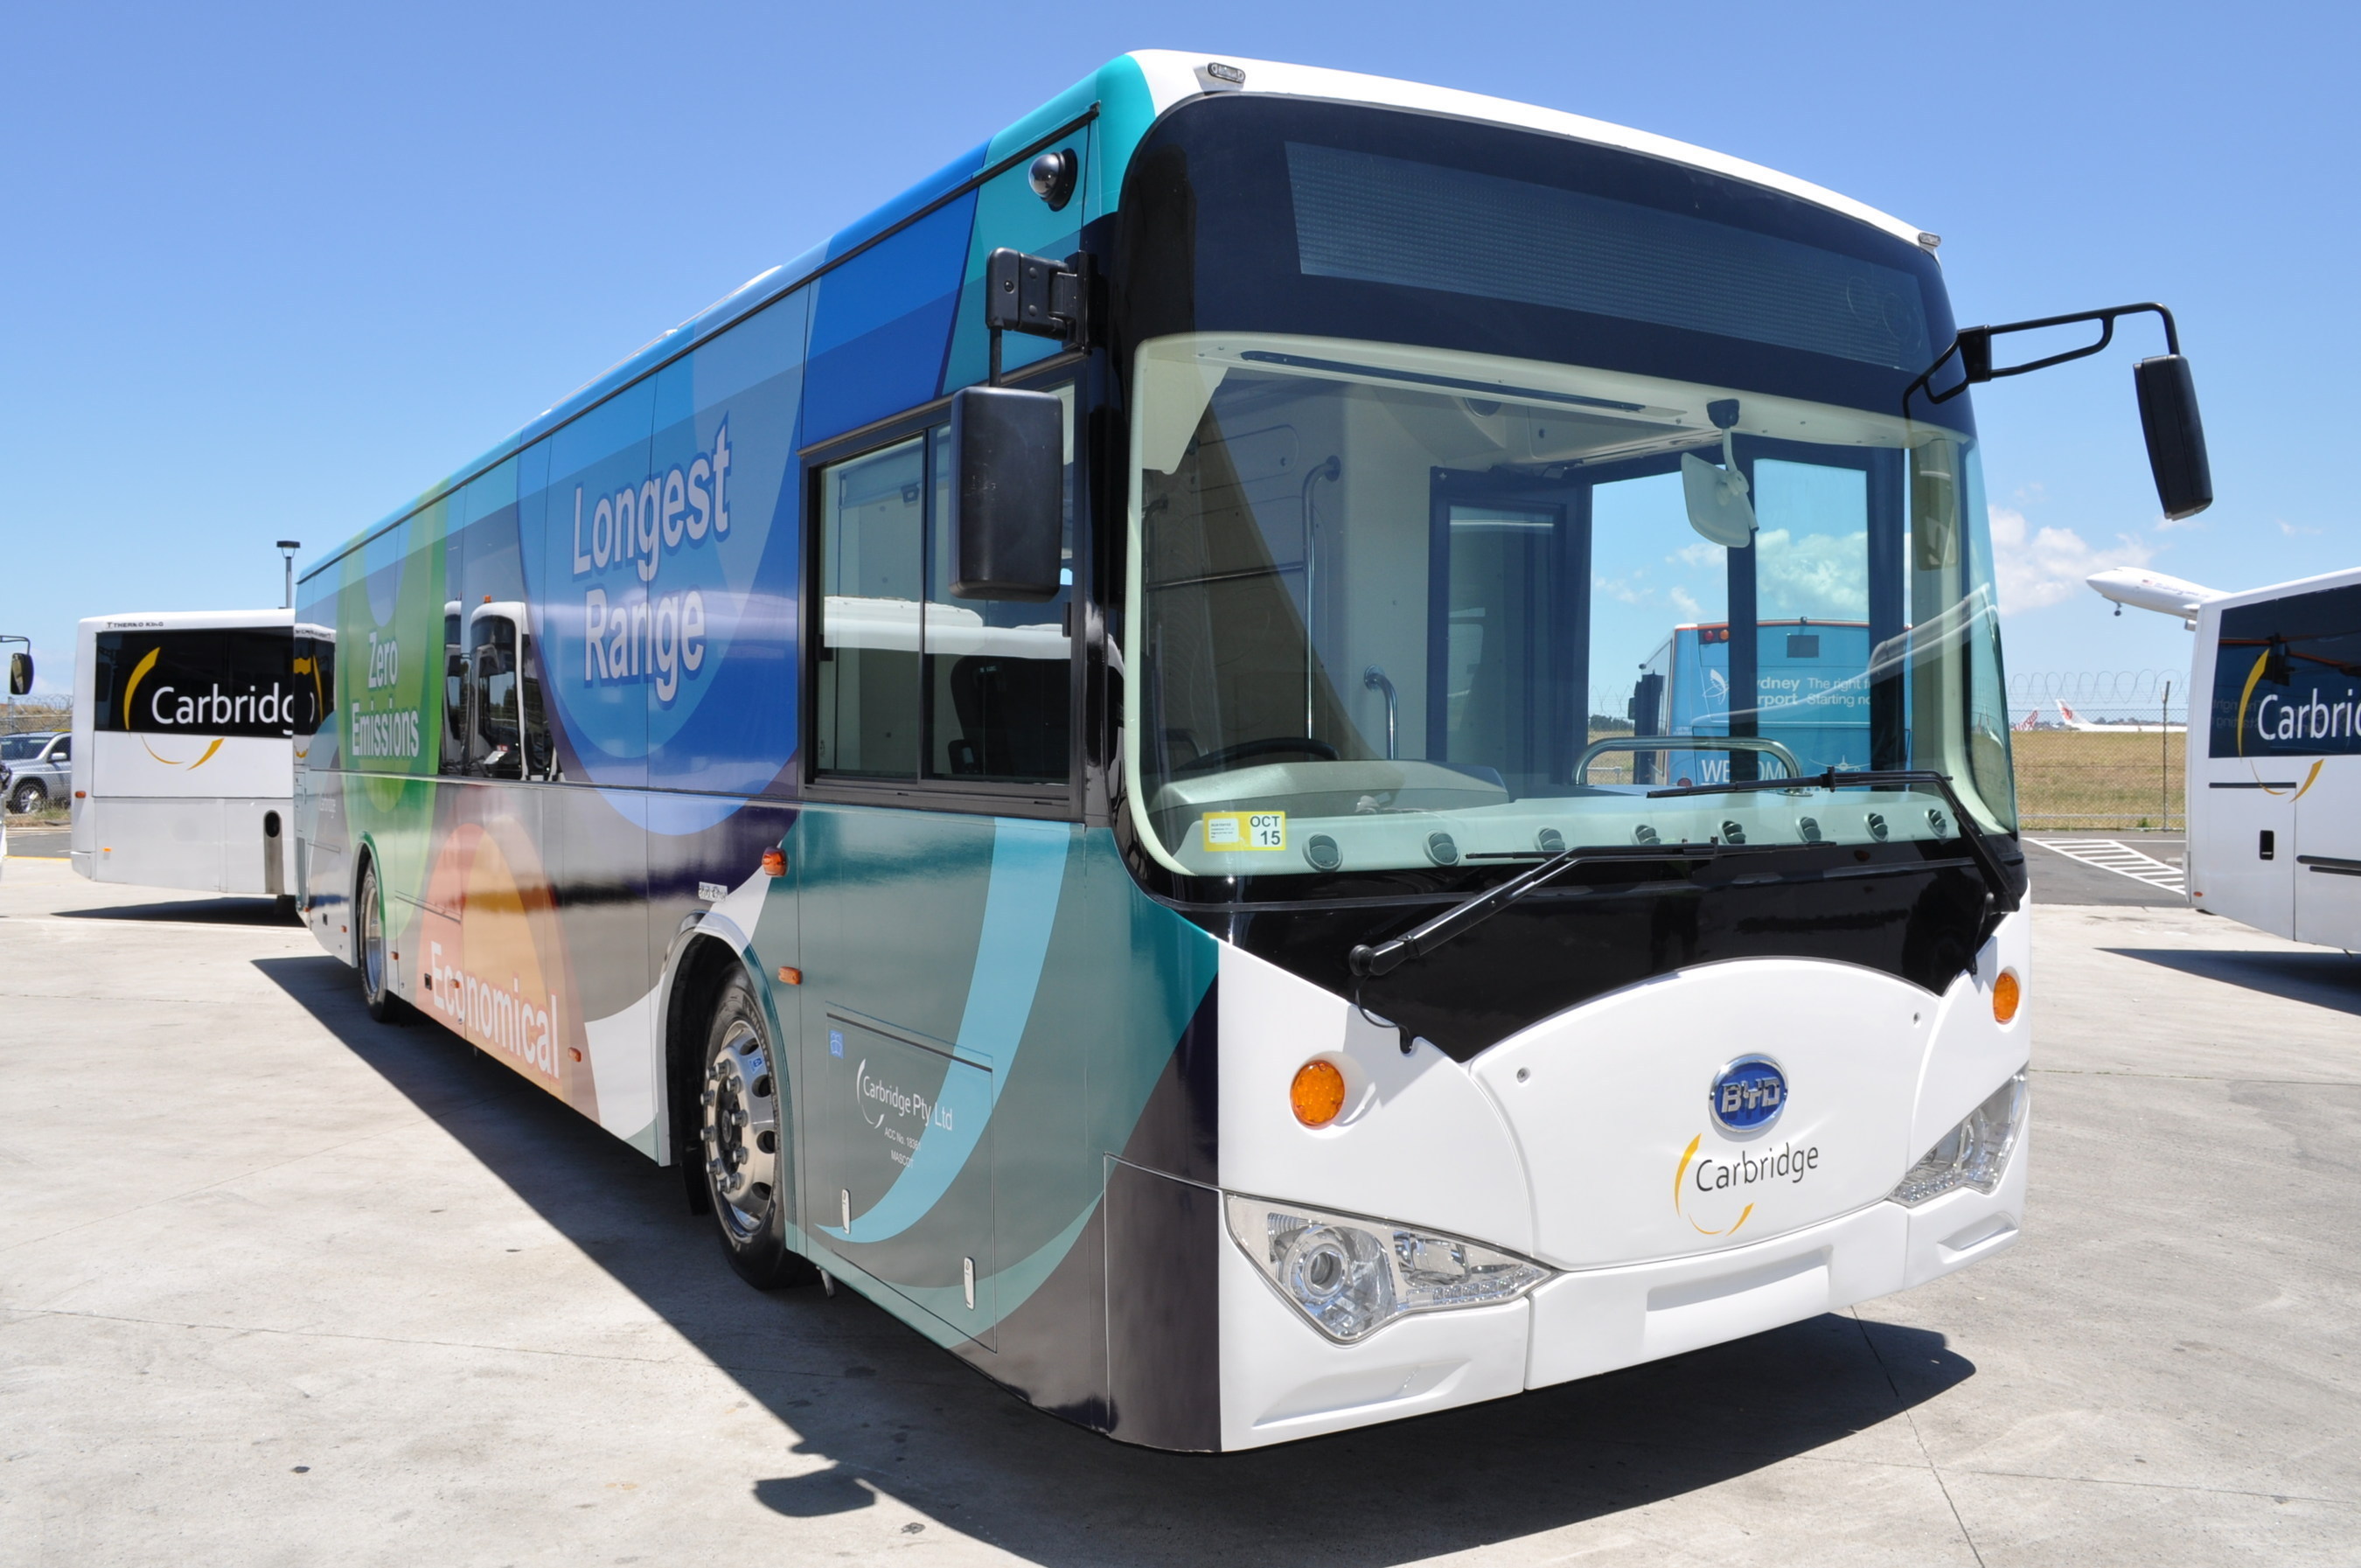 The Sydney International Airport's First Battery Electric Bus